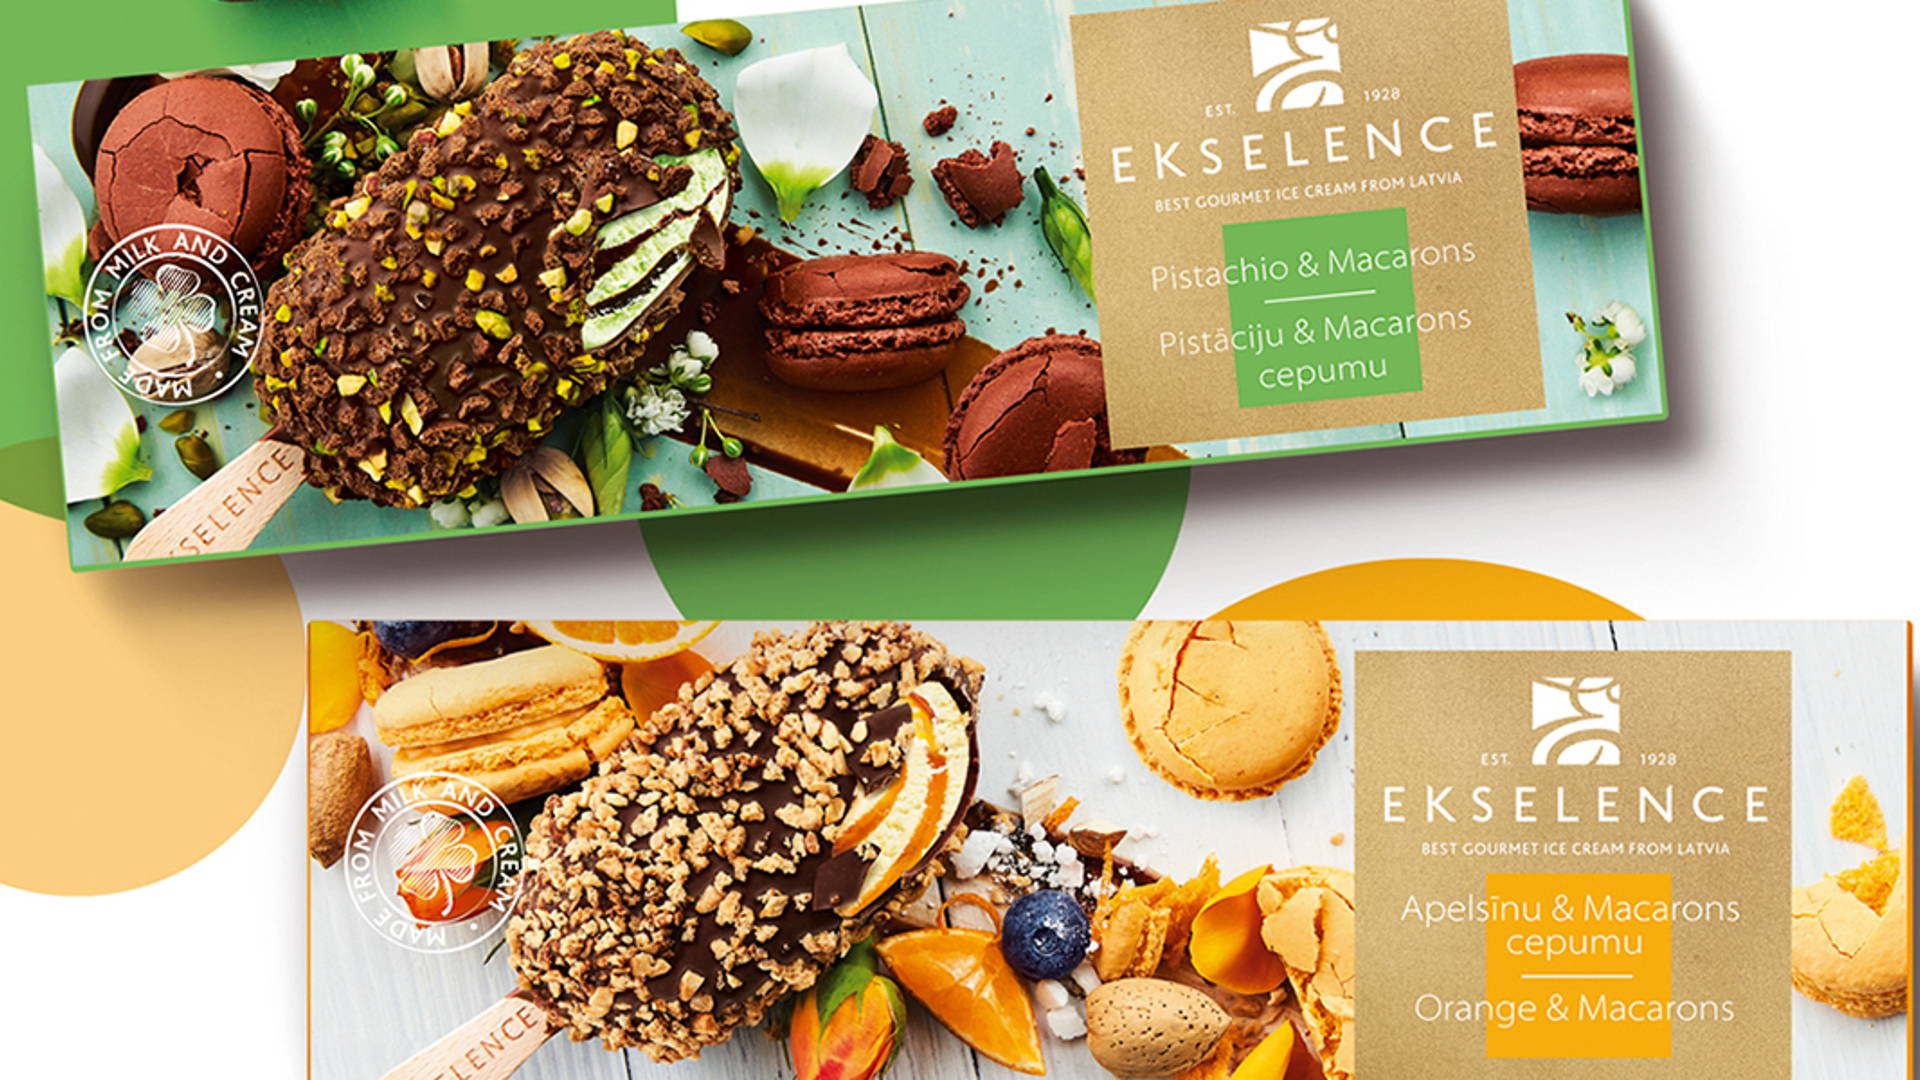 Featured image for Ekselence Macarons